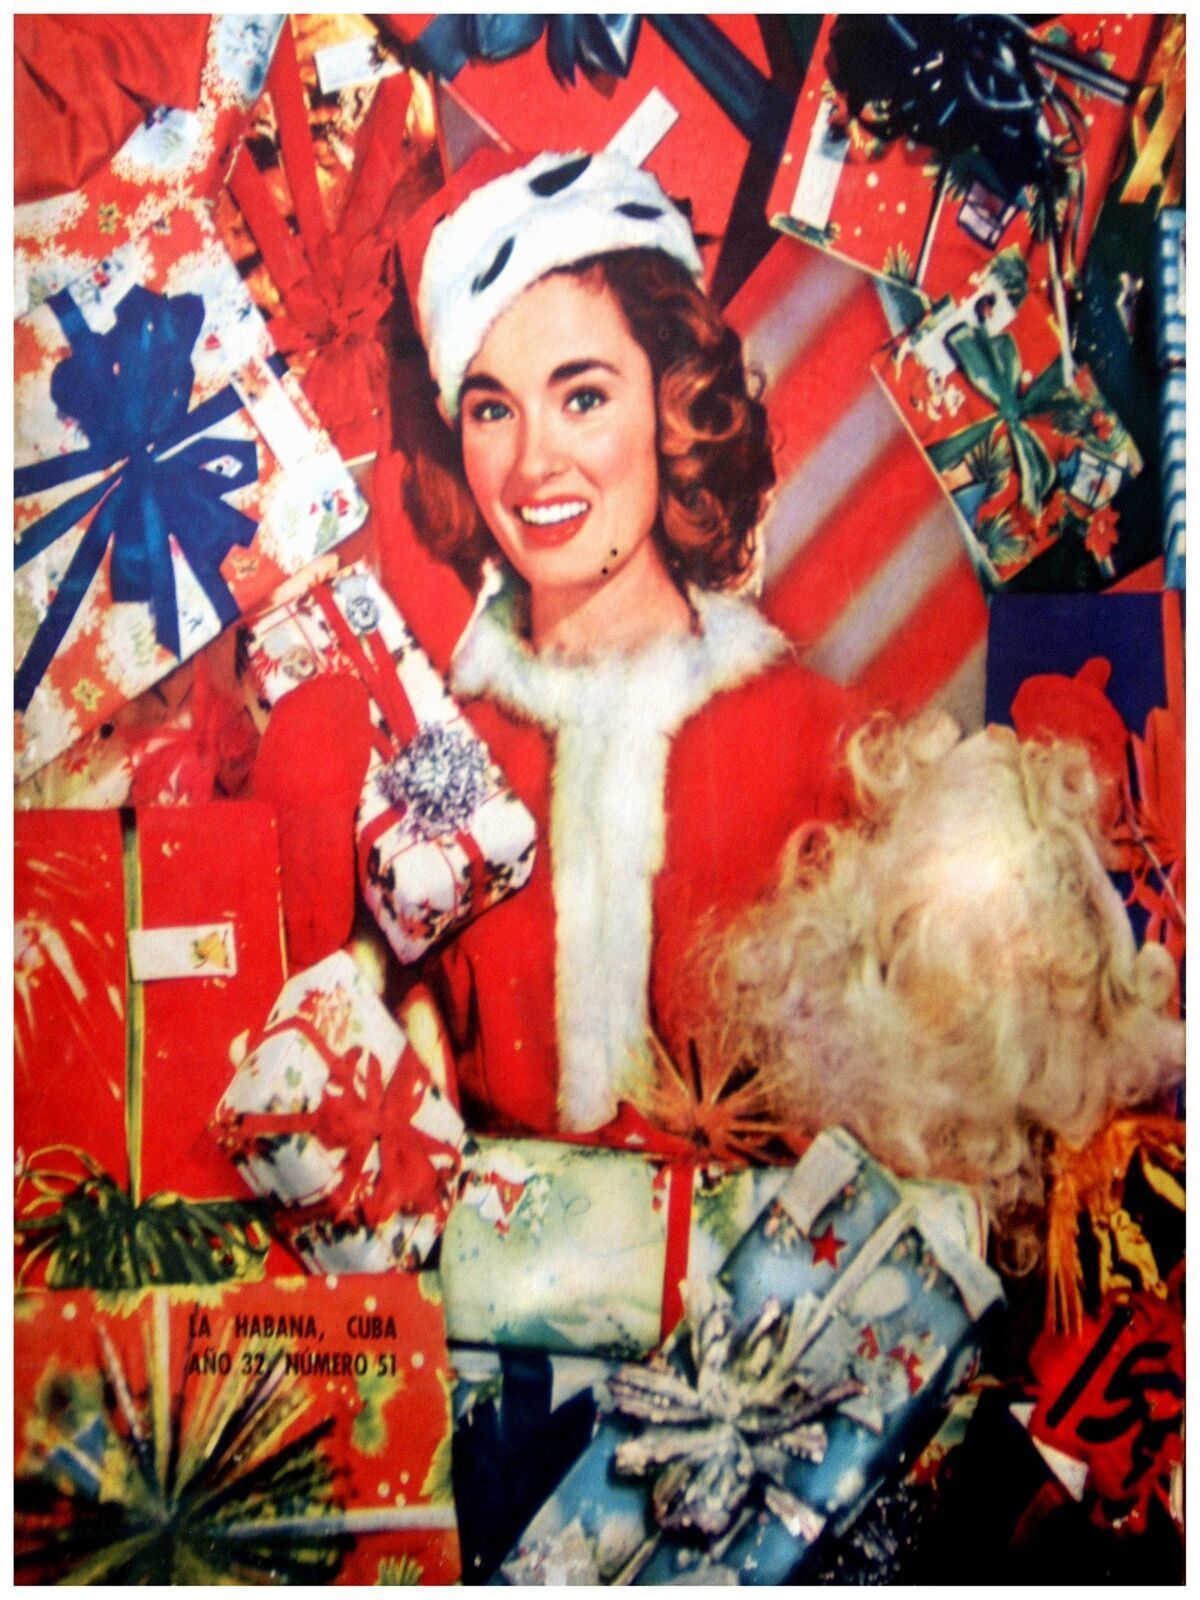 1617 Santa's helper surrounded by presents quality 18x24 Poster.wall Decorative  - $28.00